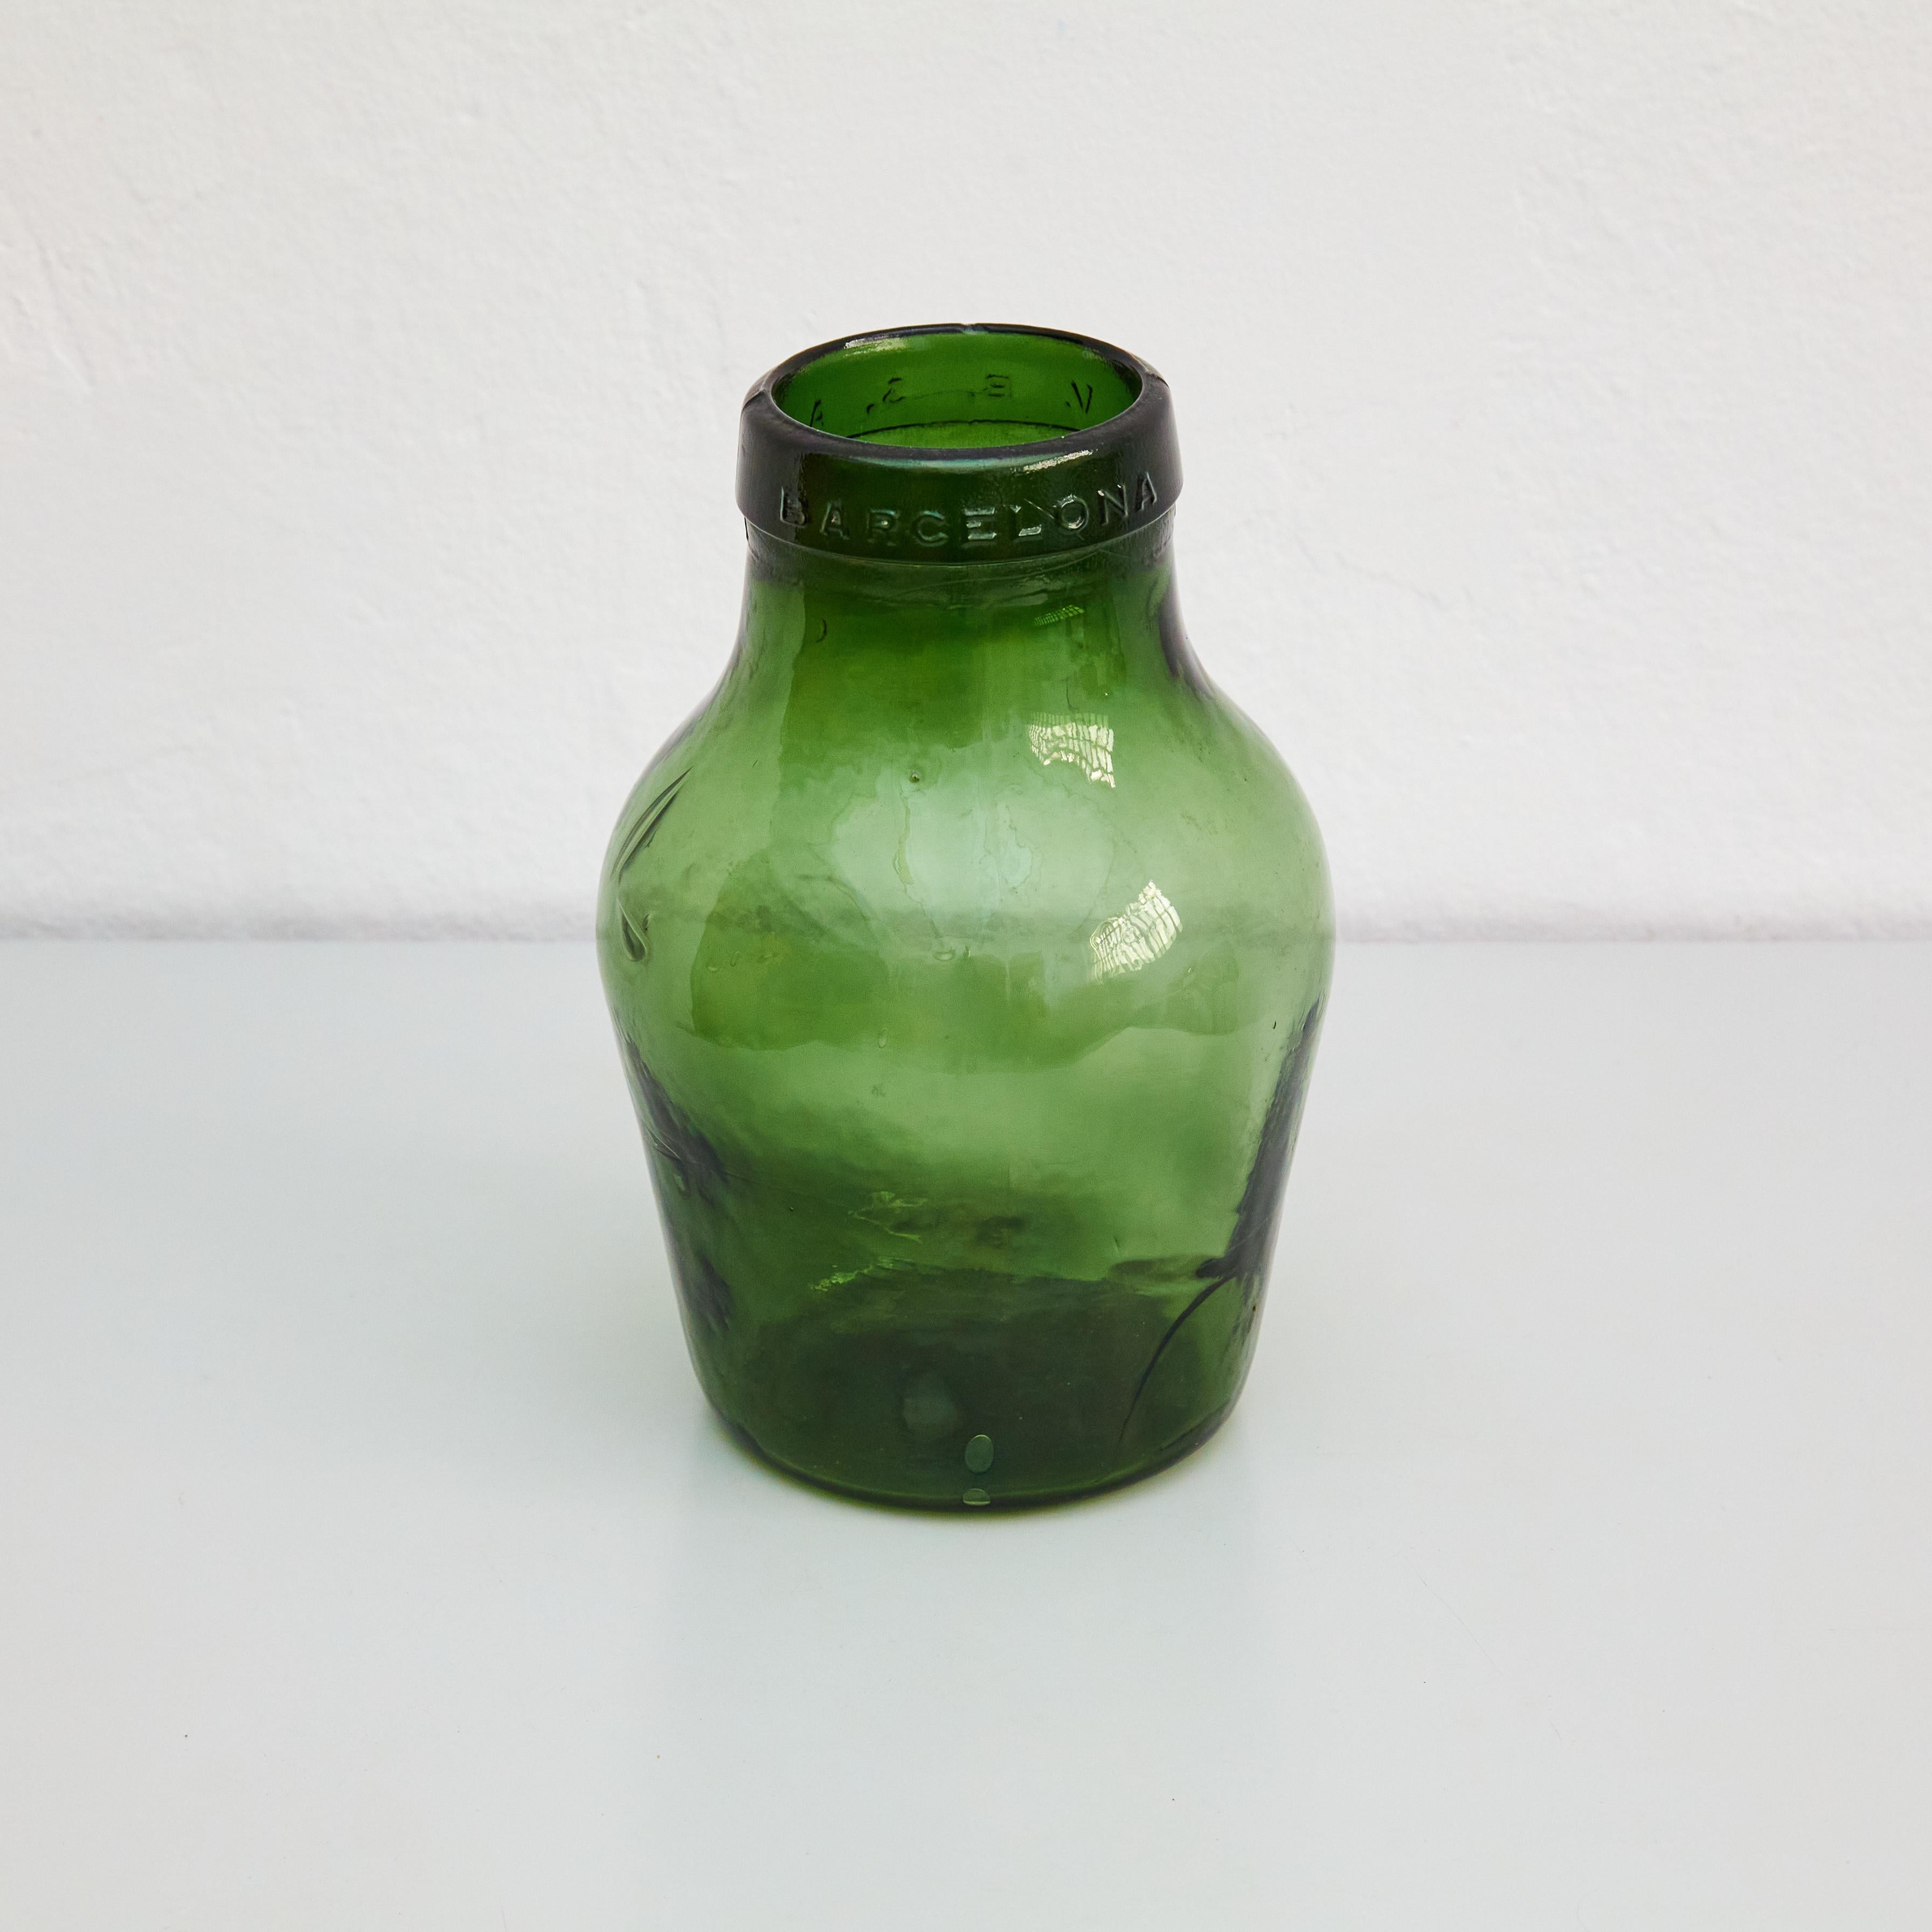 Early 20th centry Spanish glass bottle vase.

Manufactured in Spain, circa 1971.

In original condition with minor wear consistent of age and use, preserving a beautiful patina.

Materials: 
Glass 

Dimensions: 
D 3 cm x W 70 cm x H 57